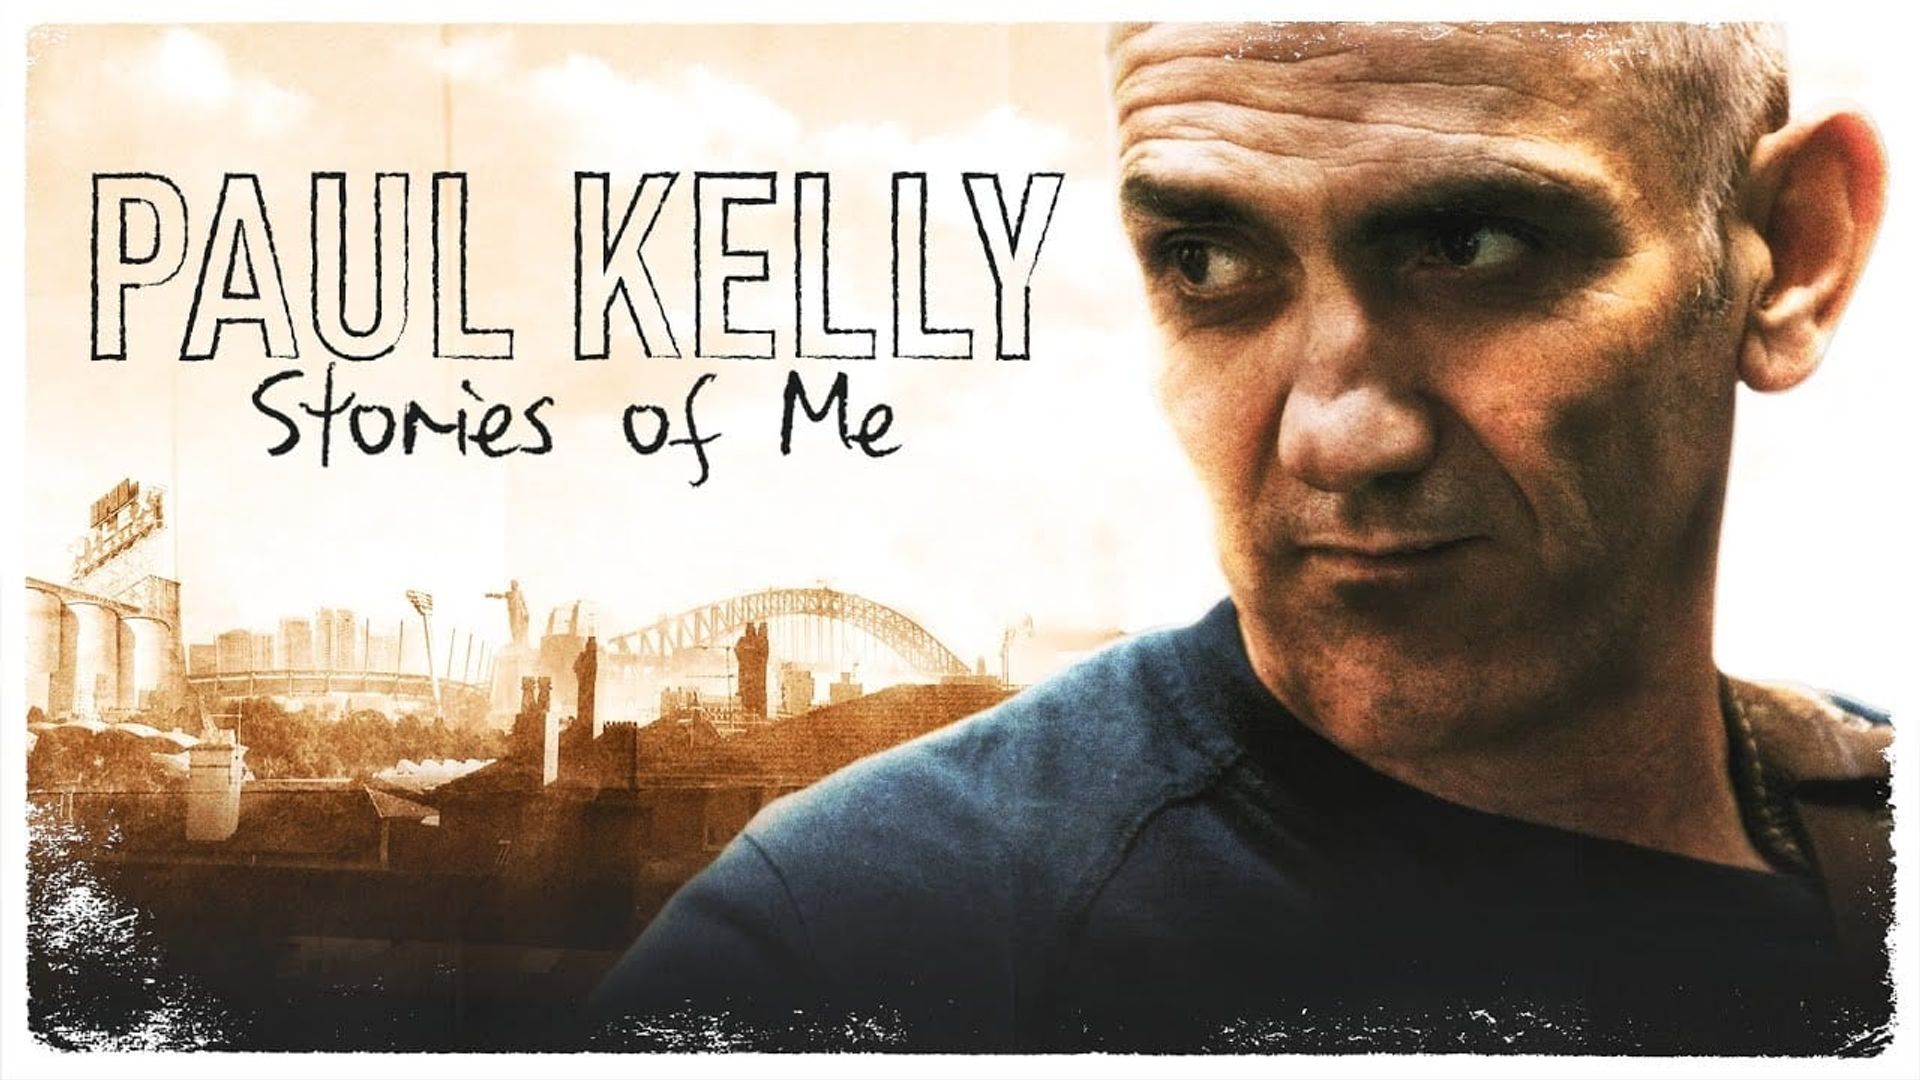 Paul Kelly - Stories of Me background